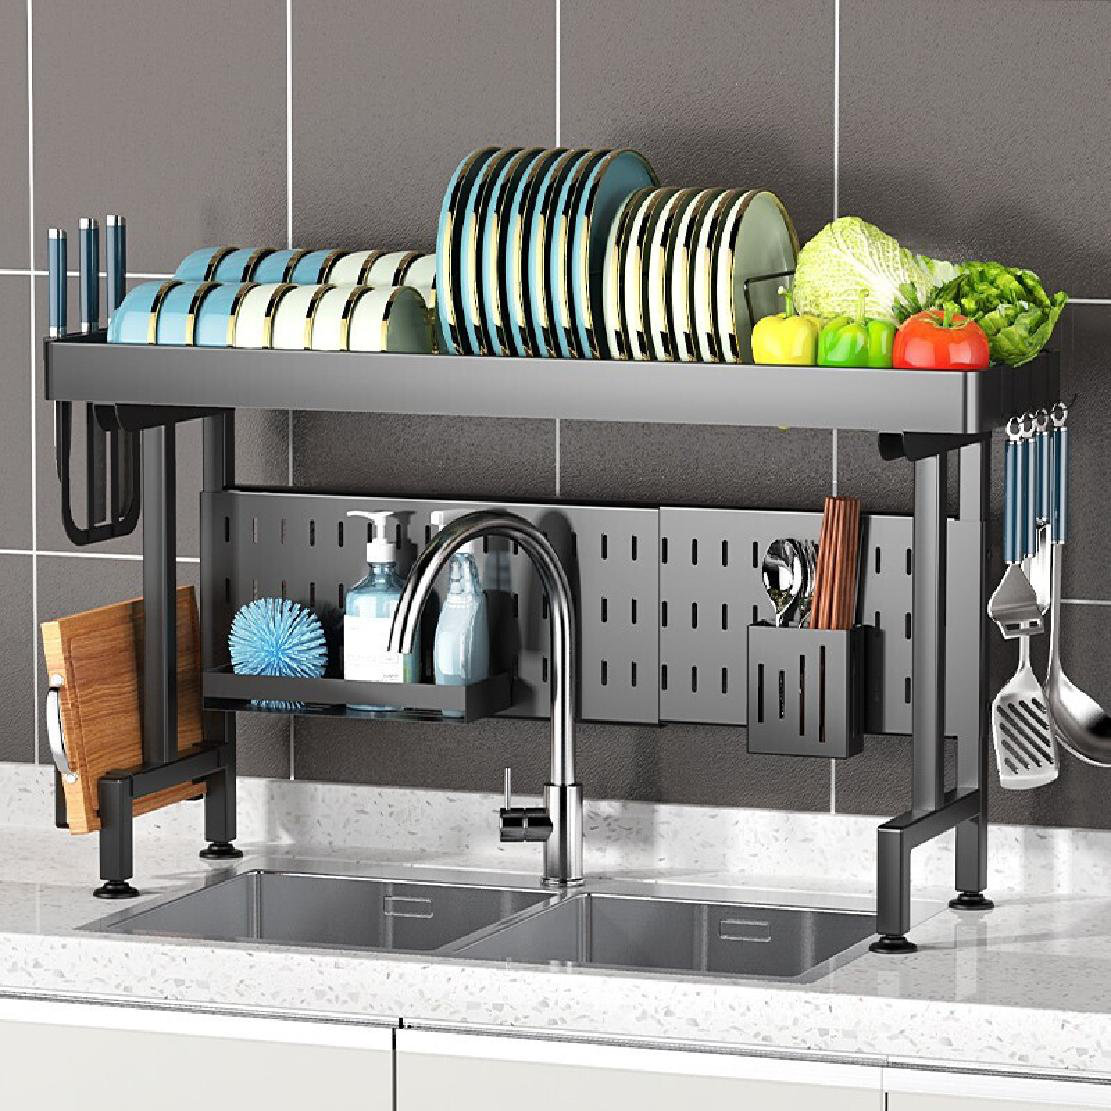  BOOSINY Over The Sink Dish Drying Rack 1 Tier Dish